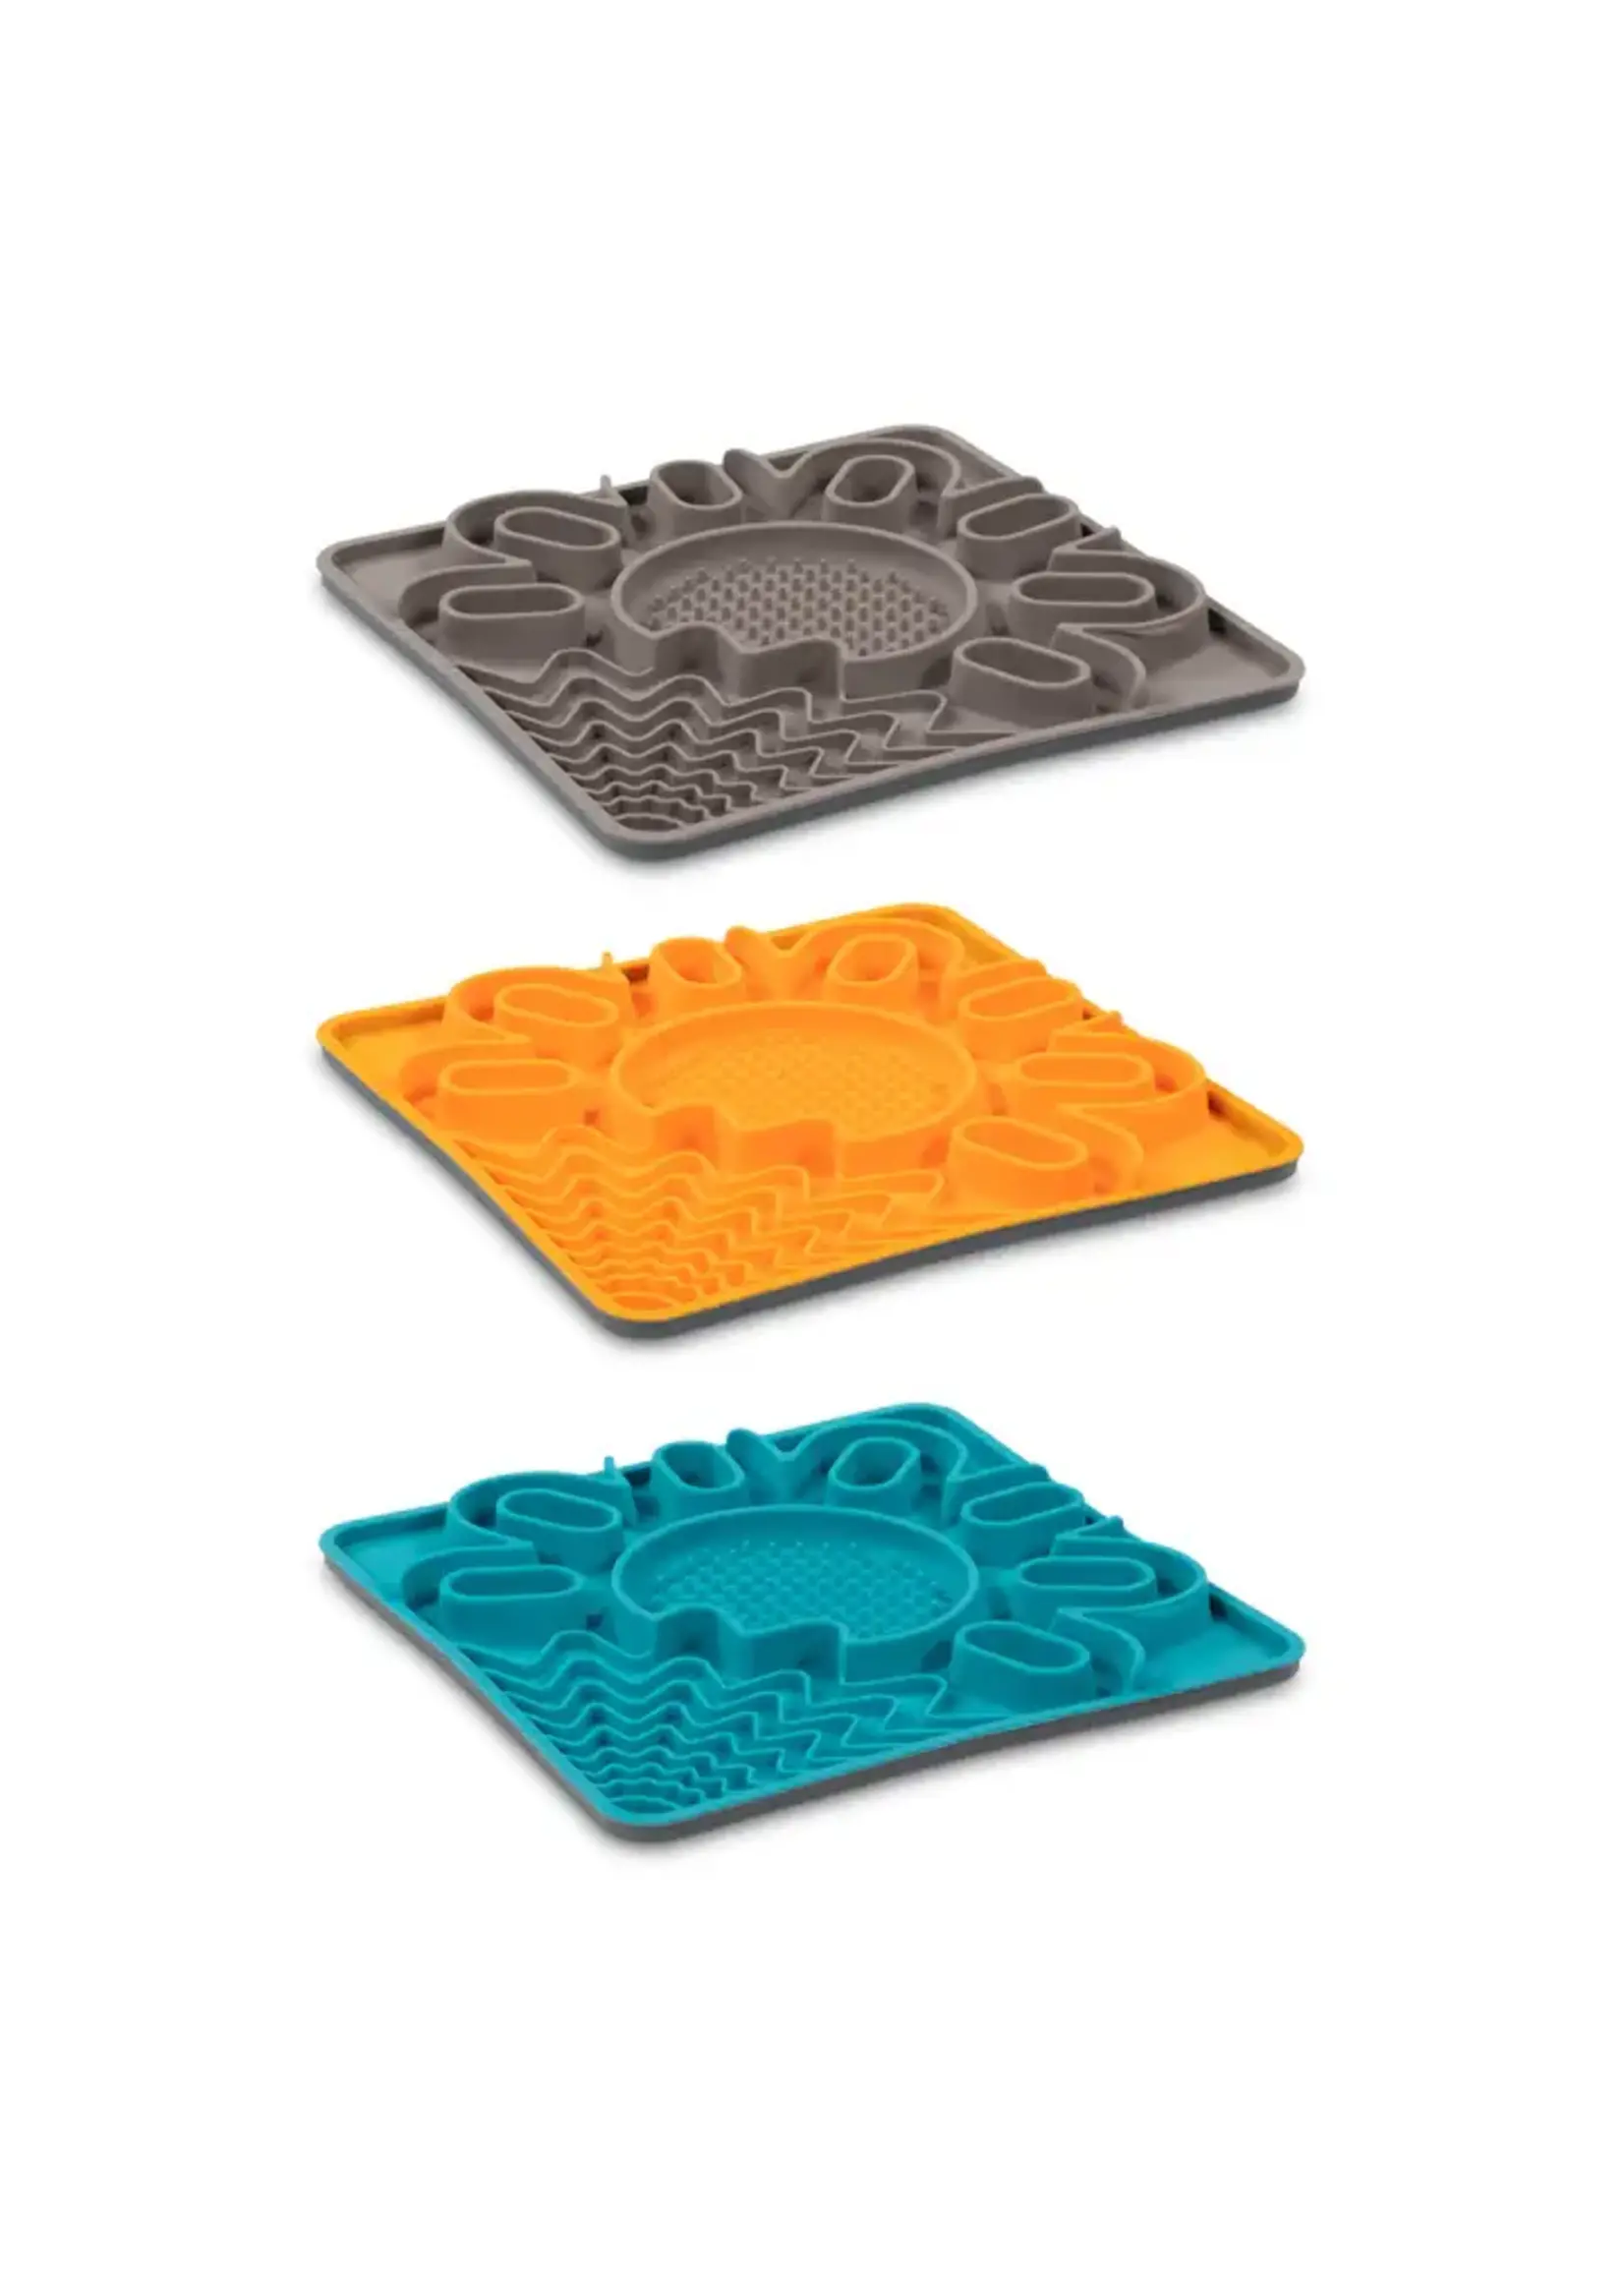 Messy Mutts Framed "Spill Resistant" Silicone Multi Surface Lick Mat (Grey)